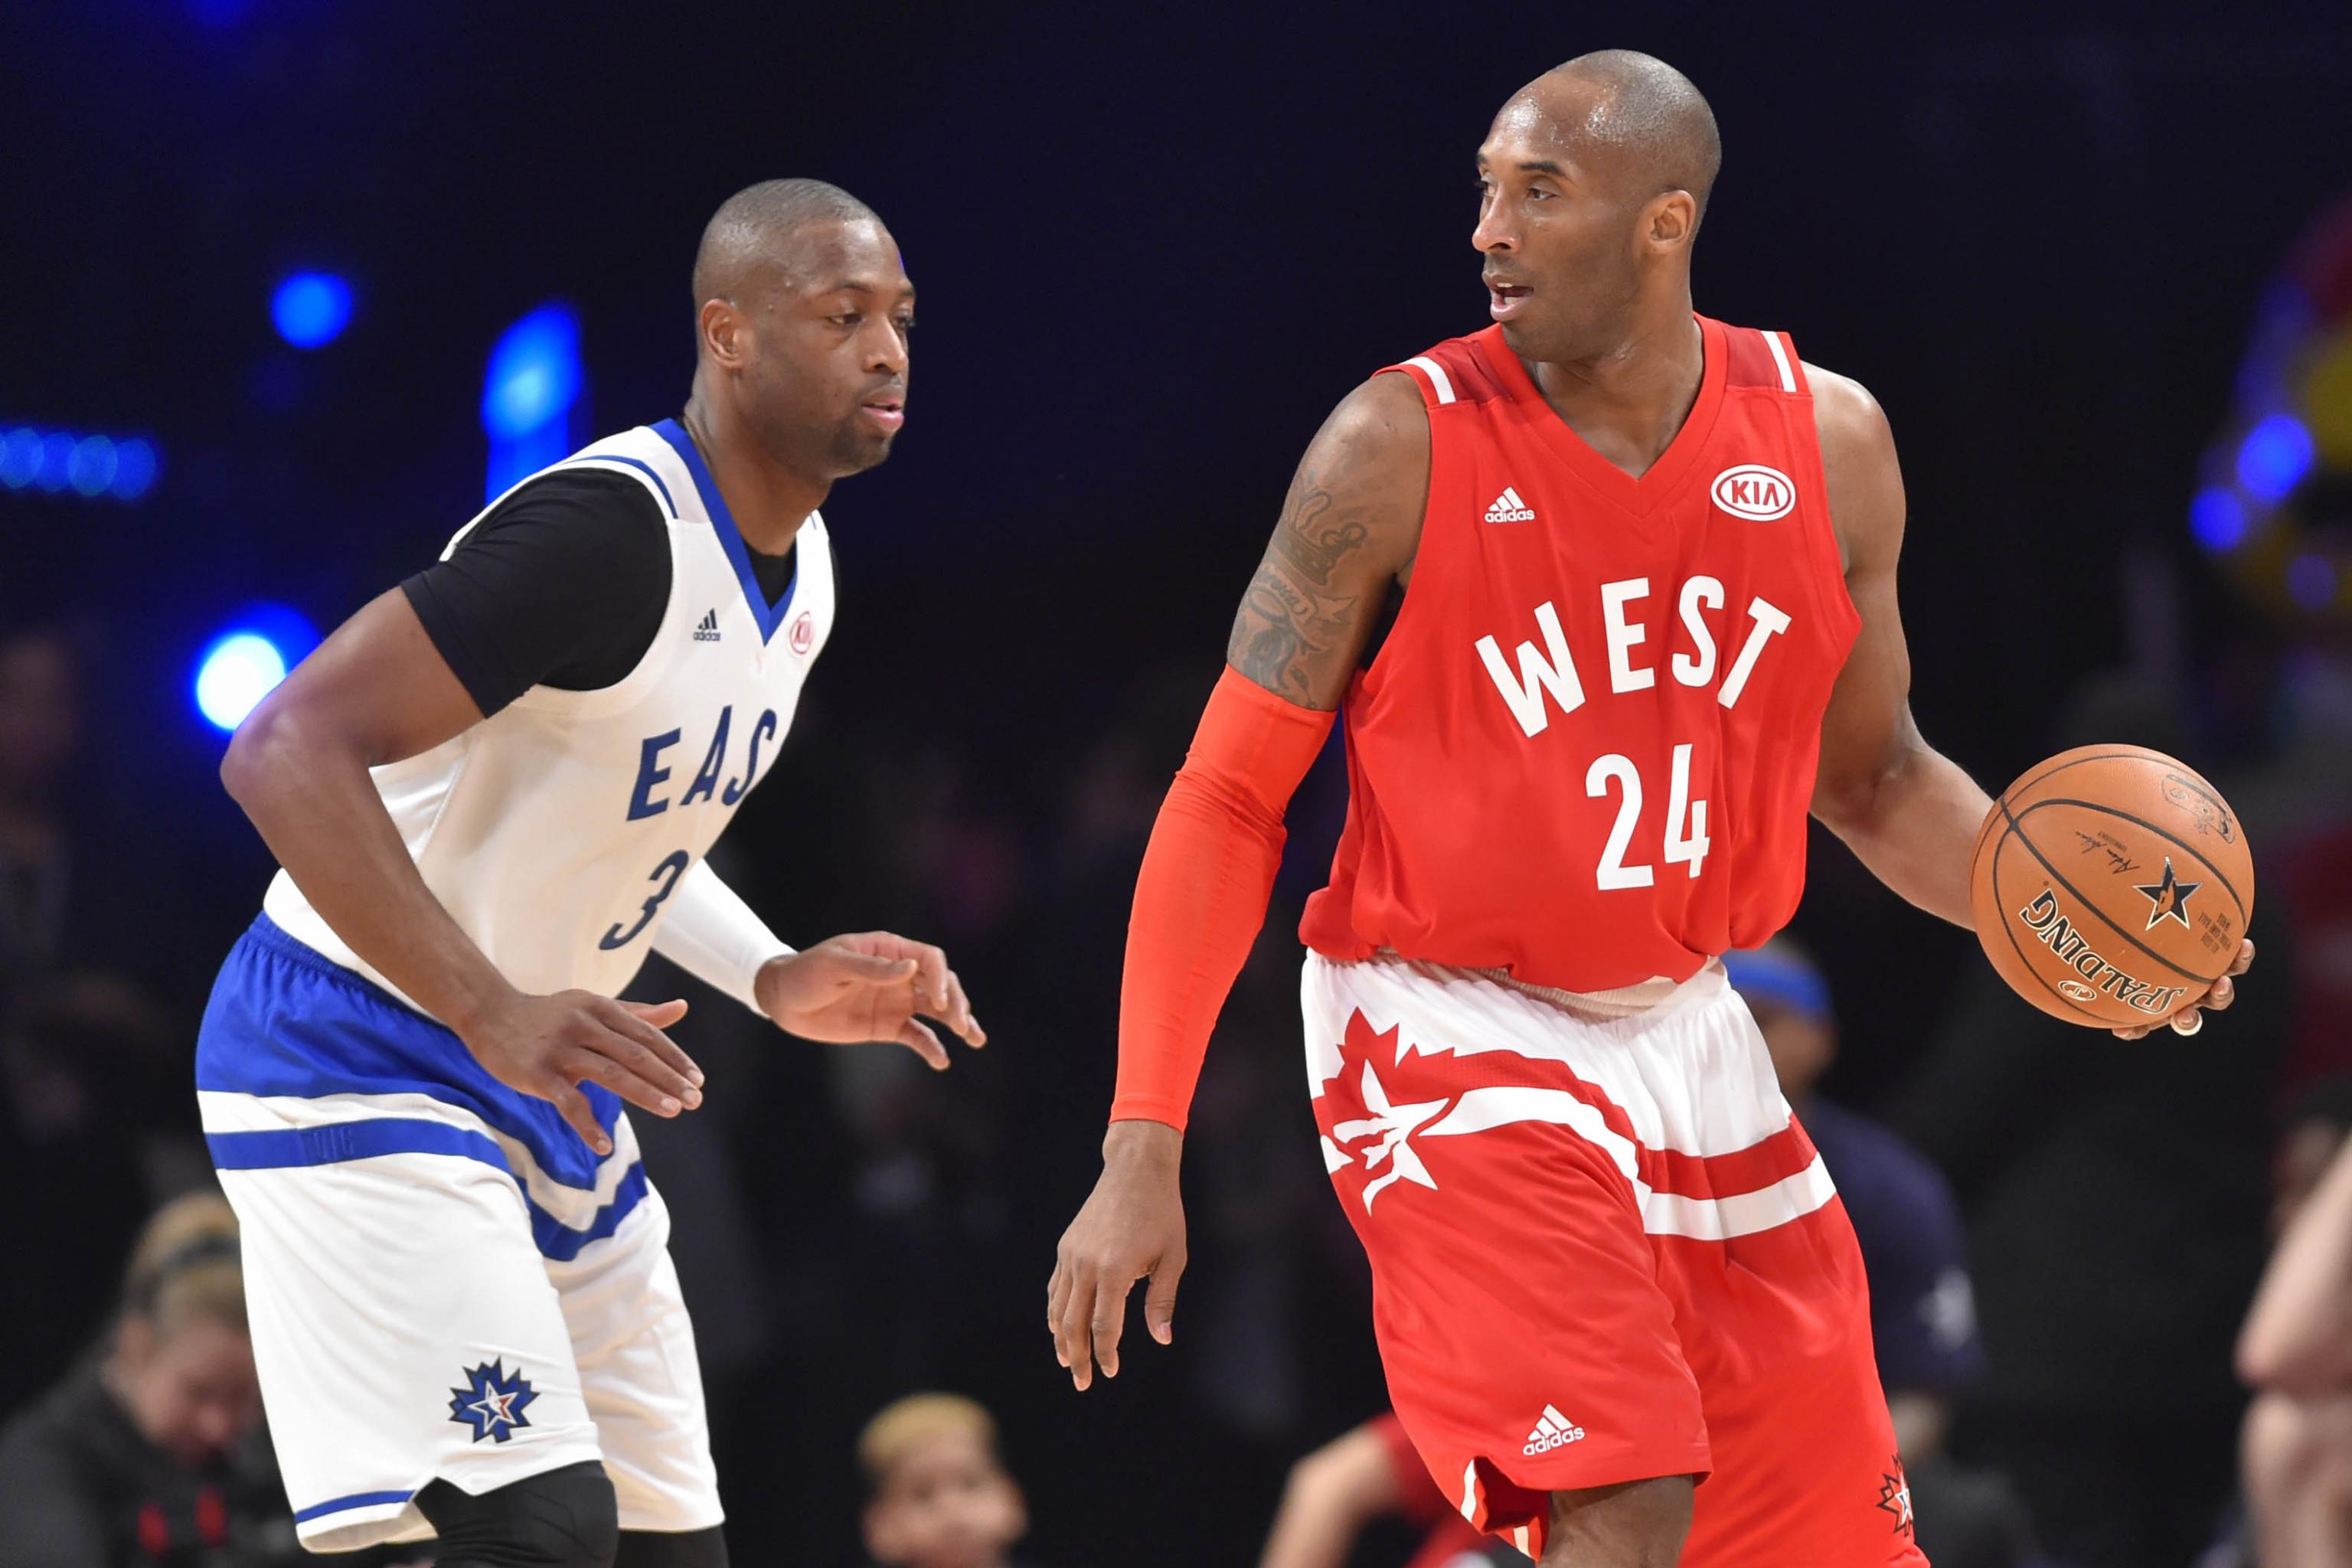 LOOK: Kobe Bryant at the All-Star Game through the years